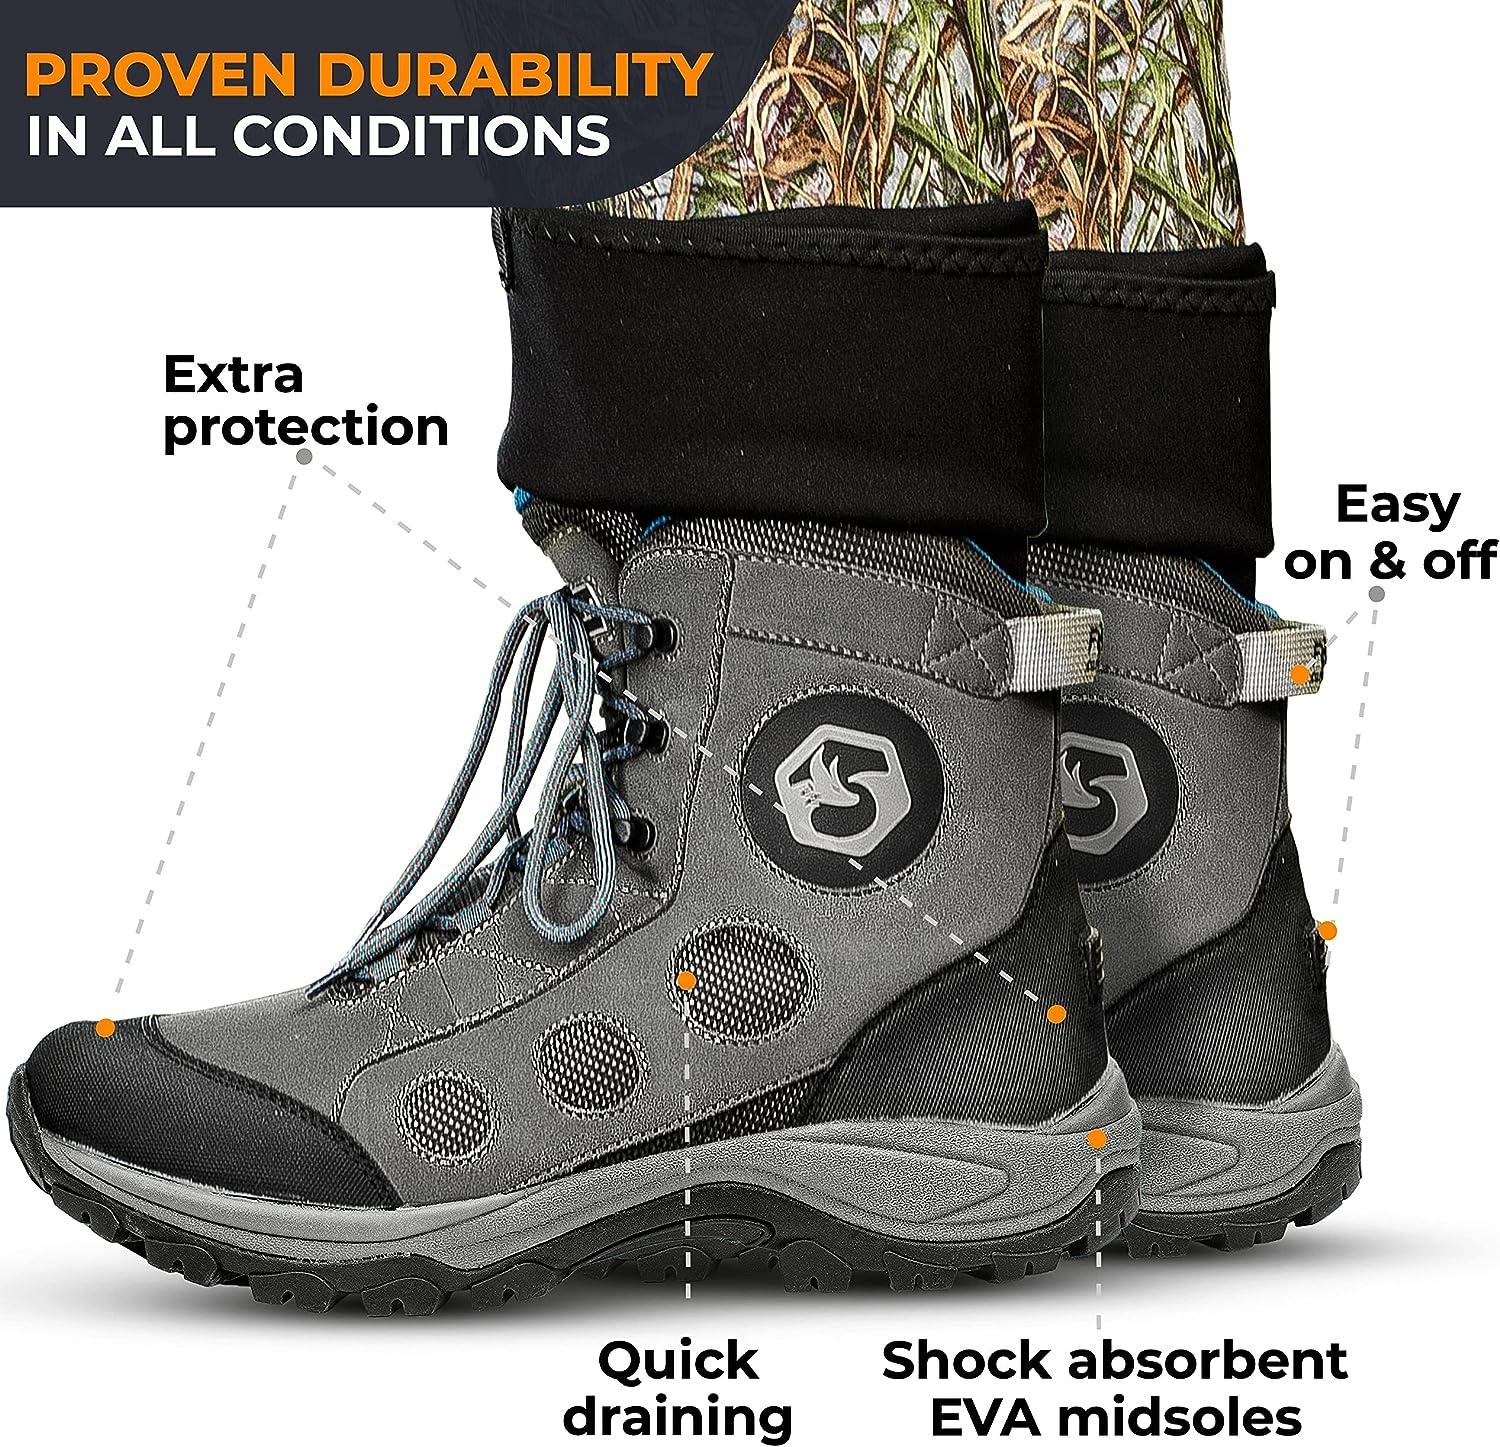 Foxelli Wading Boots Lightweight Wading Boots for Men, Rubber Sole